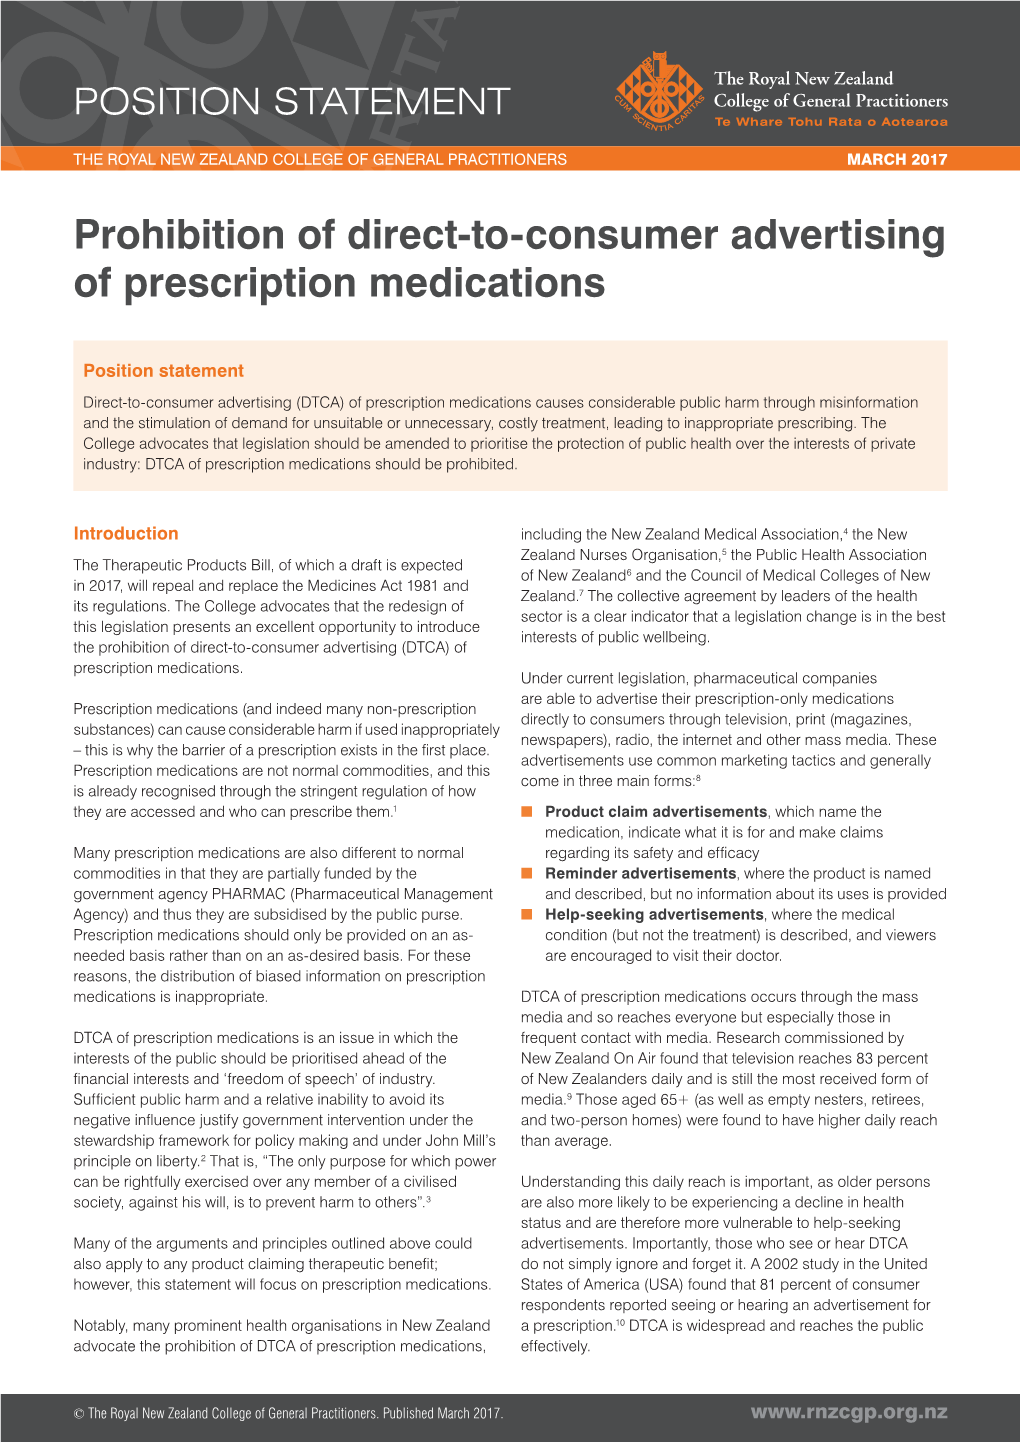 Prohibition of Direct-To-Consumer Advertising of Prescription Medications